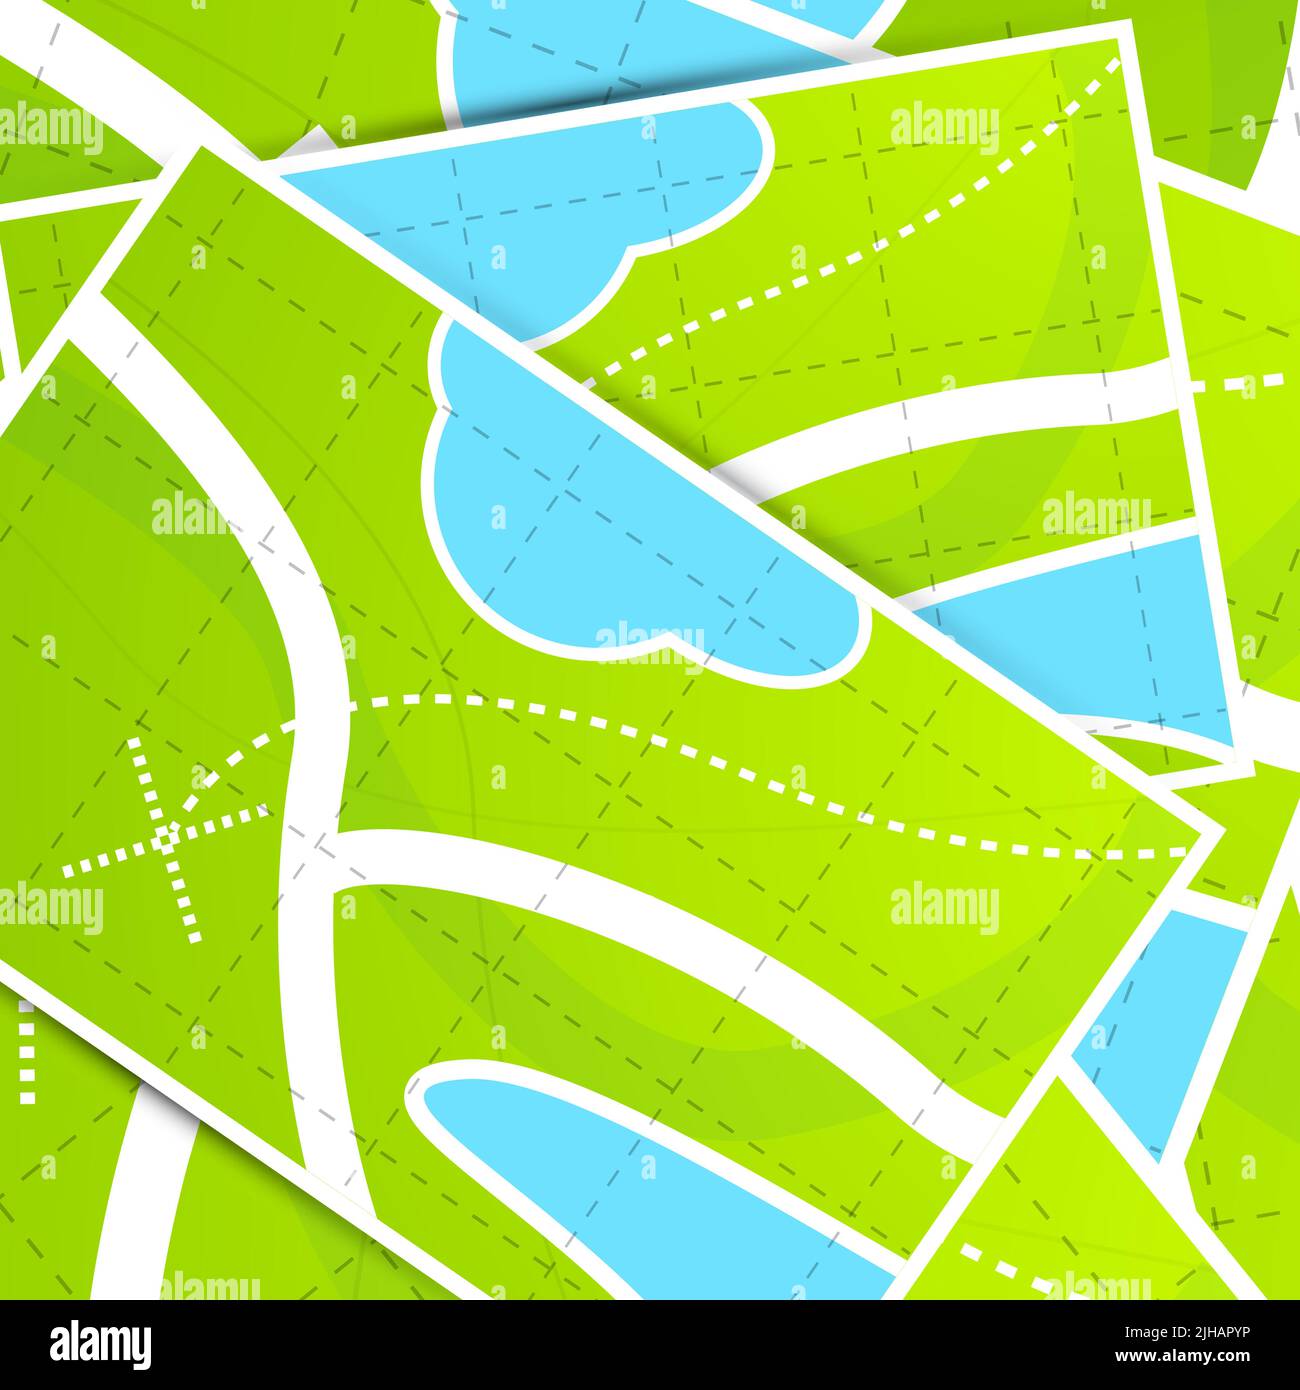 Vector background made of maps Stock Vector